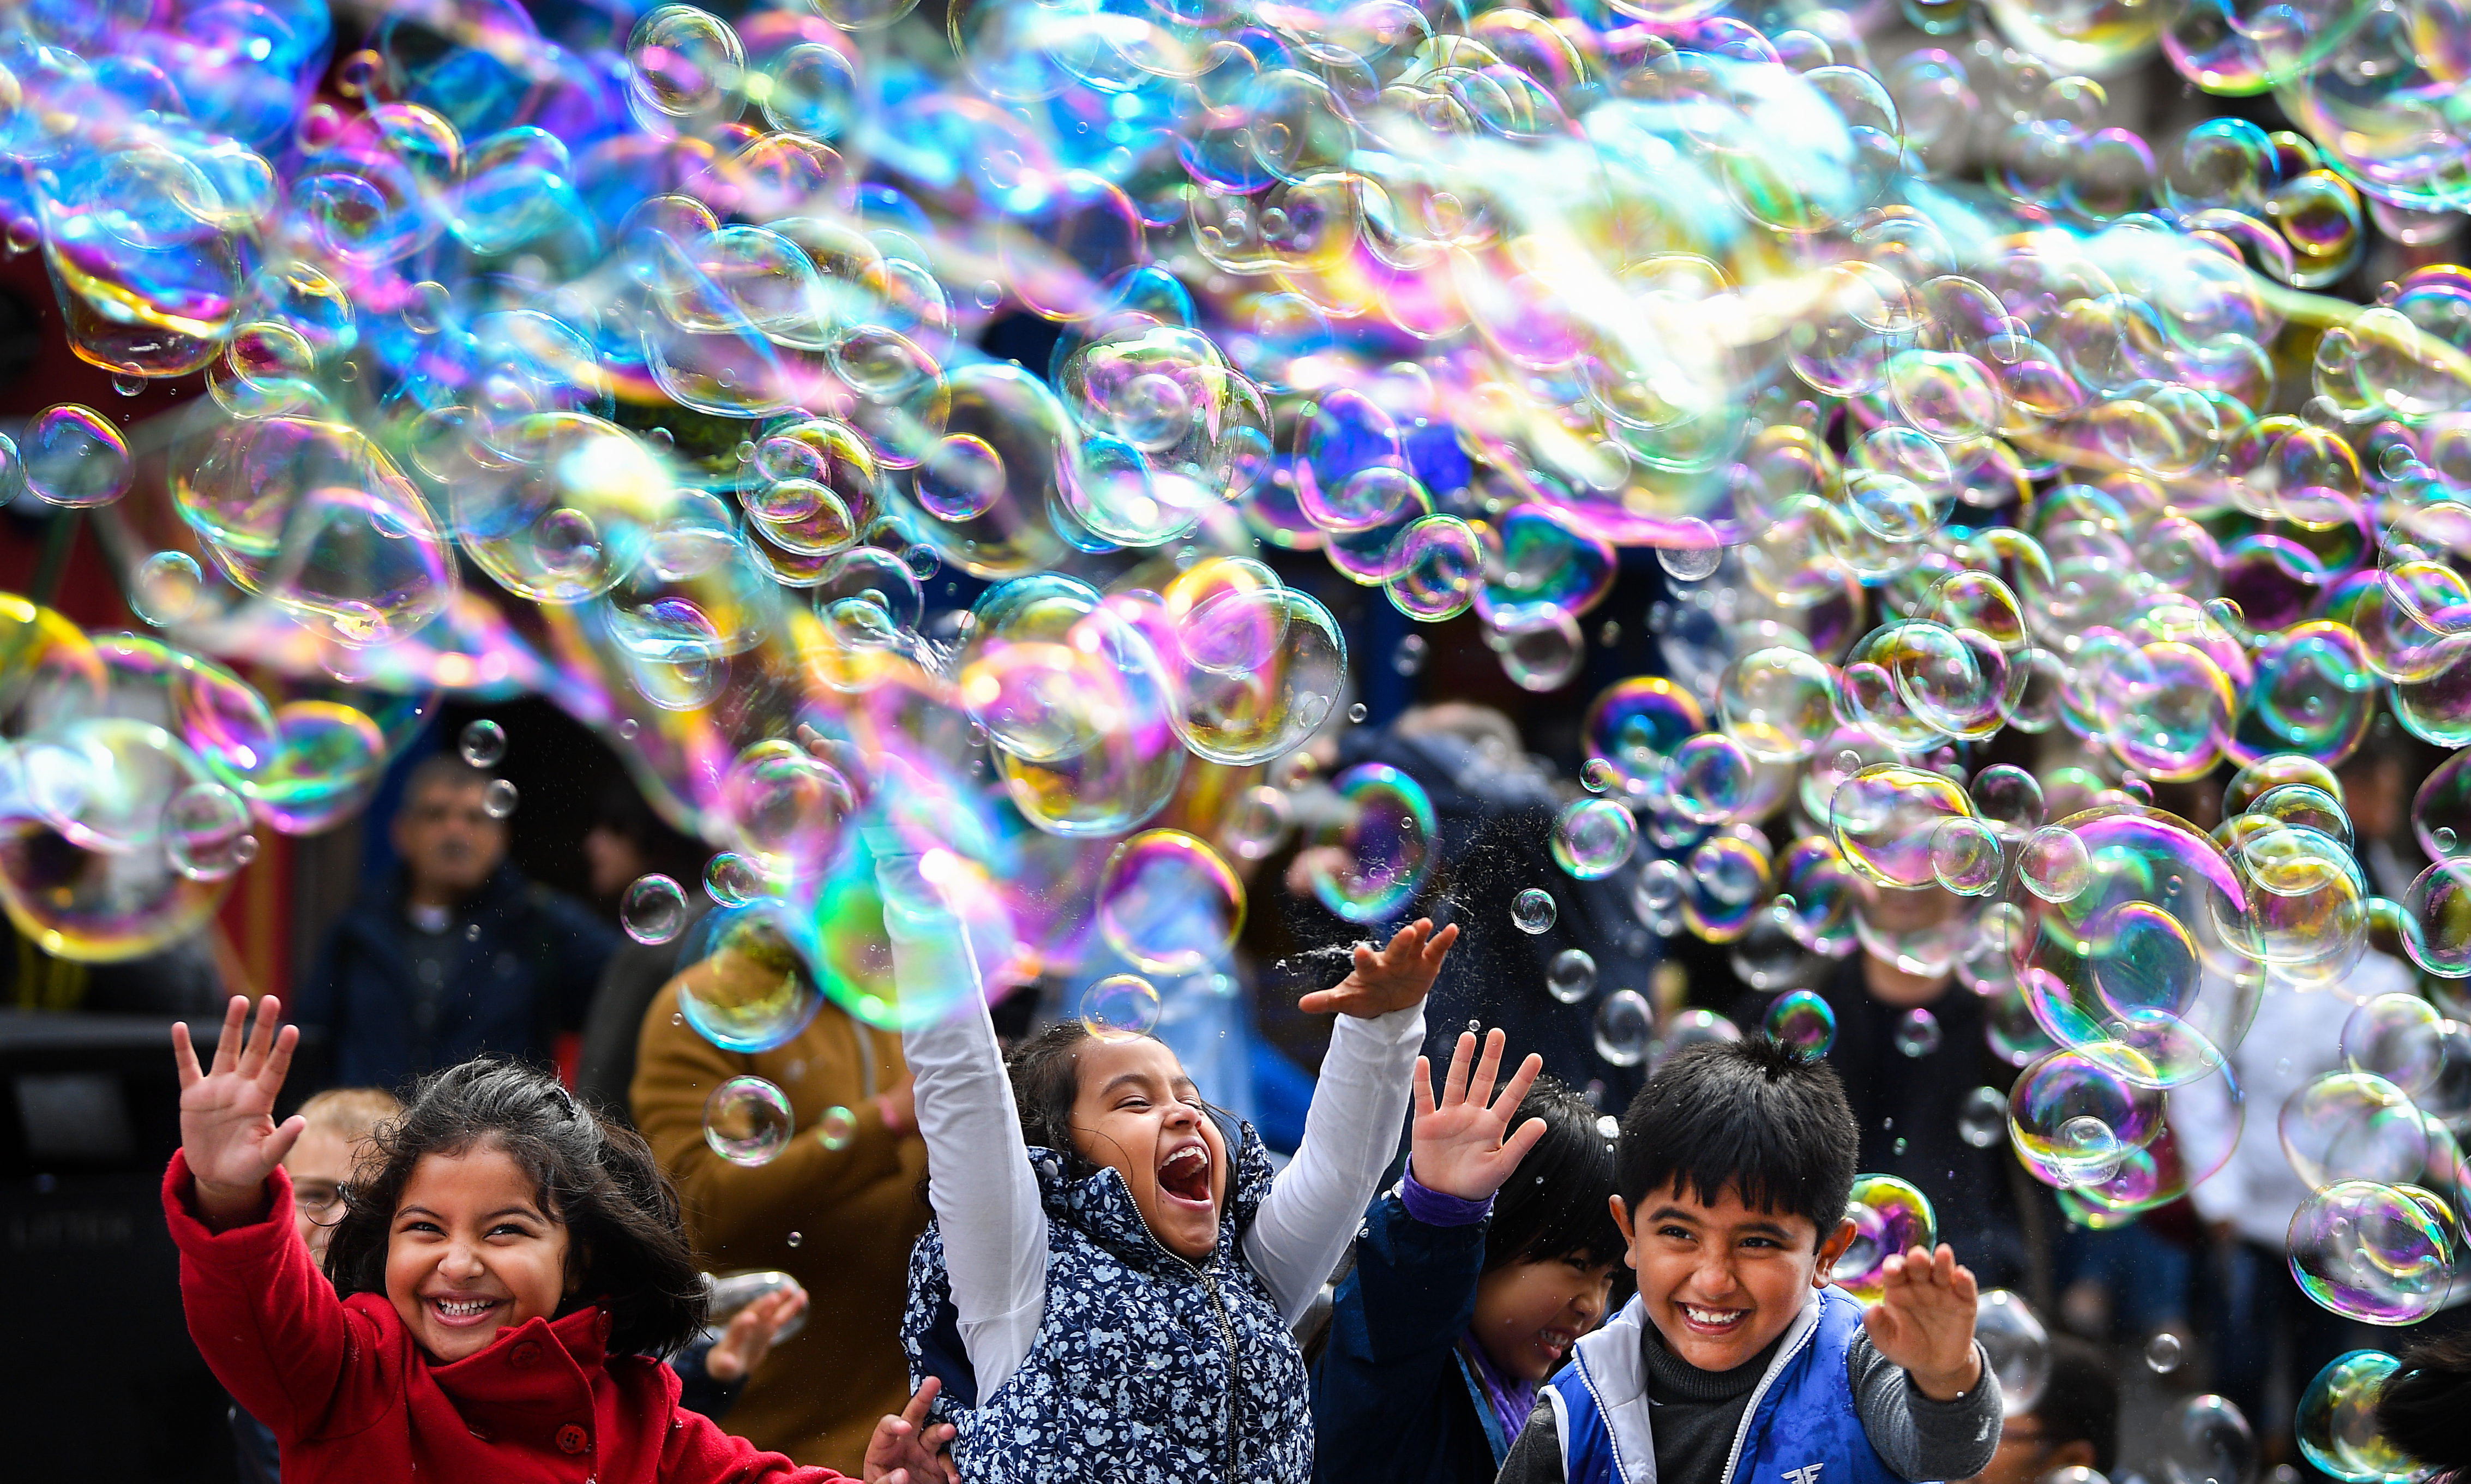 A street performer on the Royal Mile entertains members of the public with a mass of bubbles in Edinburgh.